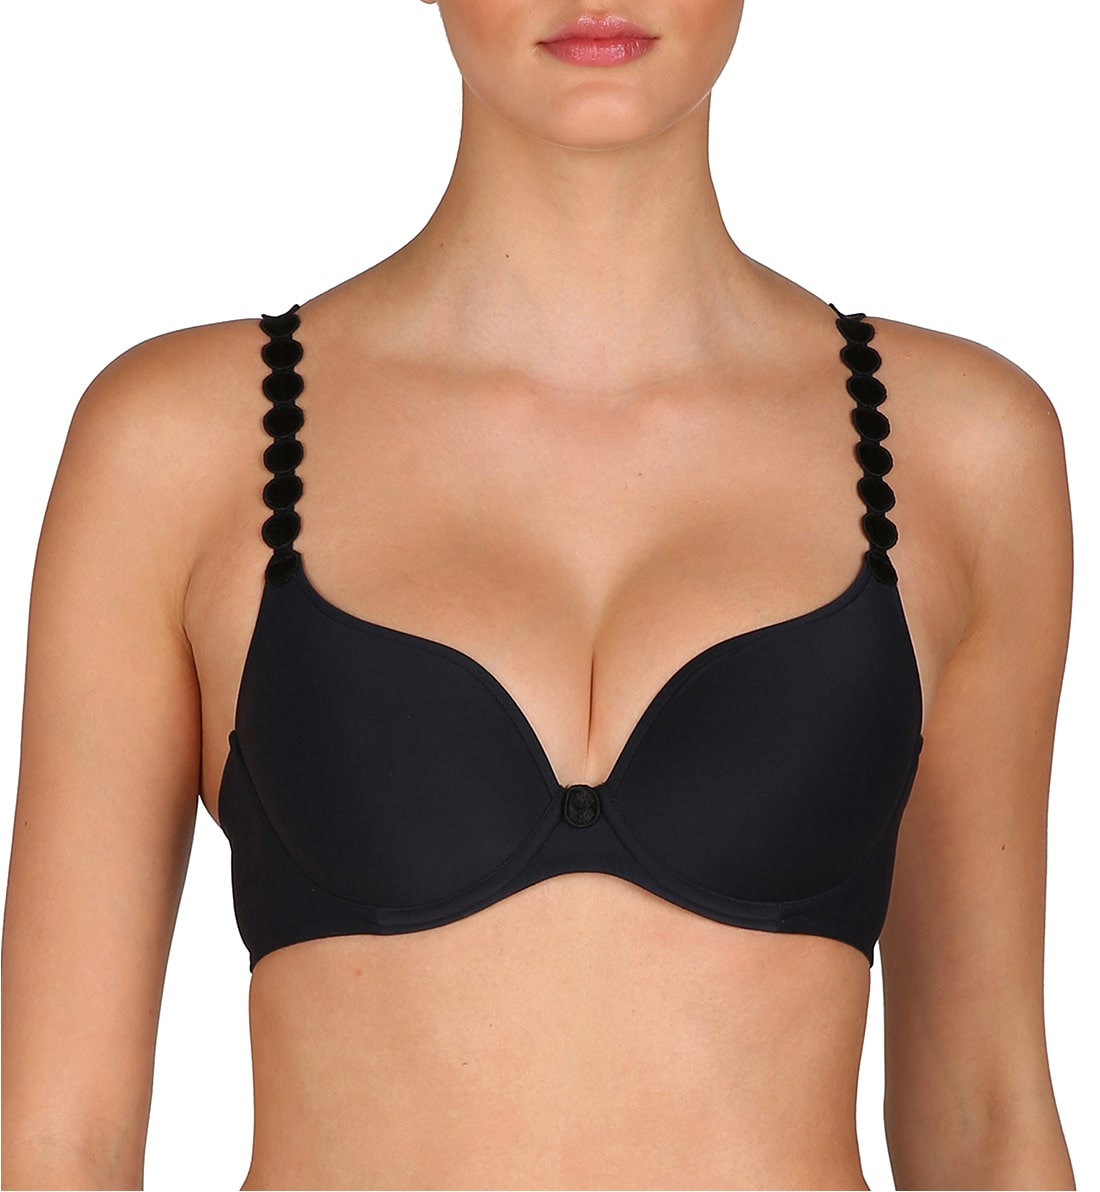 Marie Jo Tom Convertible Seamless Underwire Bra (0120826),30C,Charcoal - Charcoal,30C